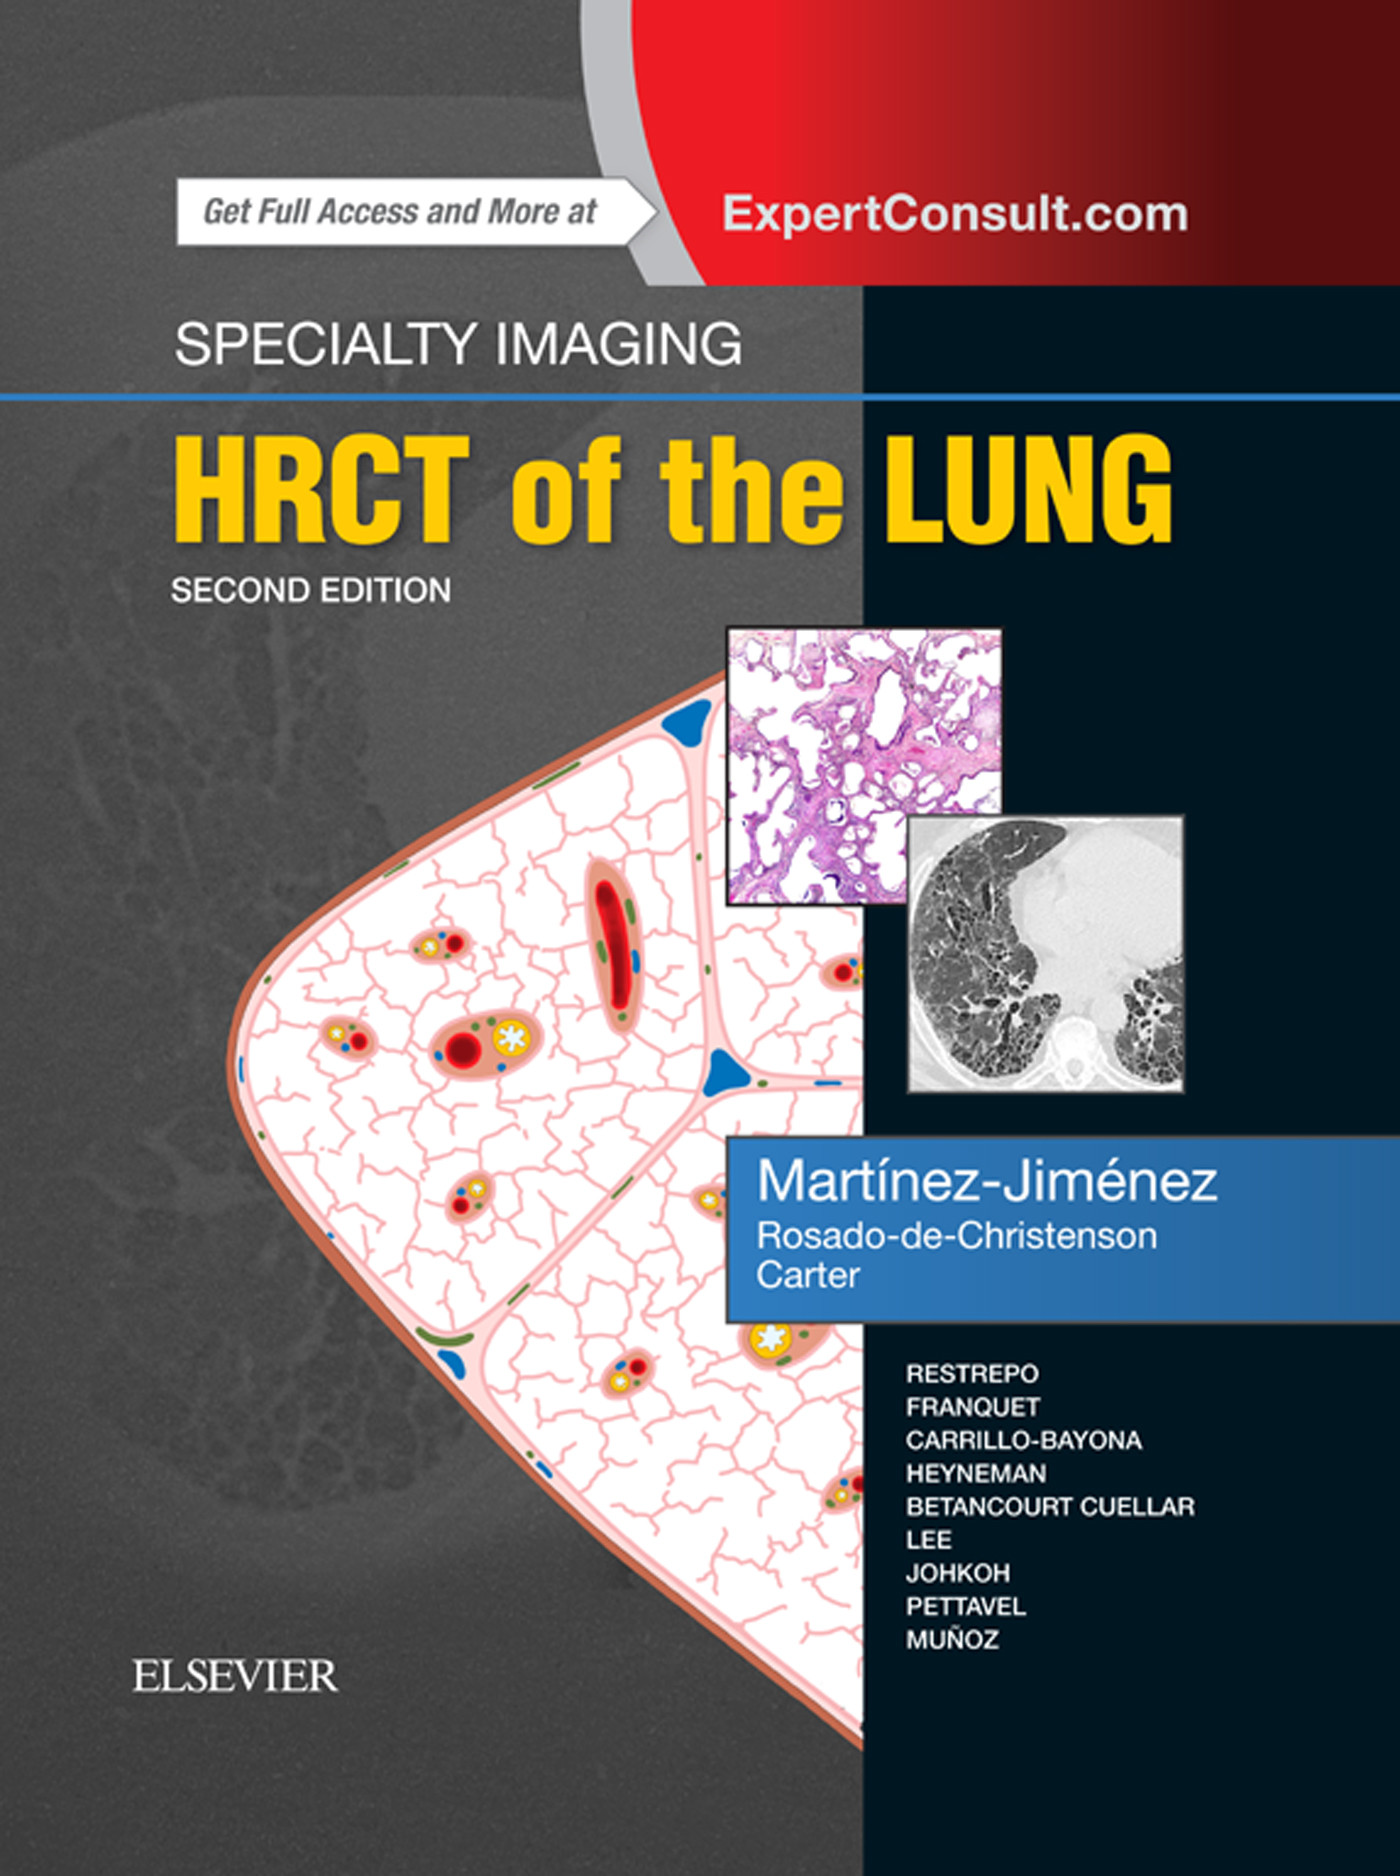 Specialty Imaging: HRCT of the Lung E-Book